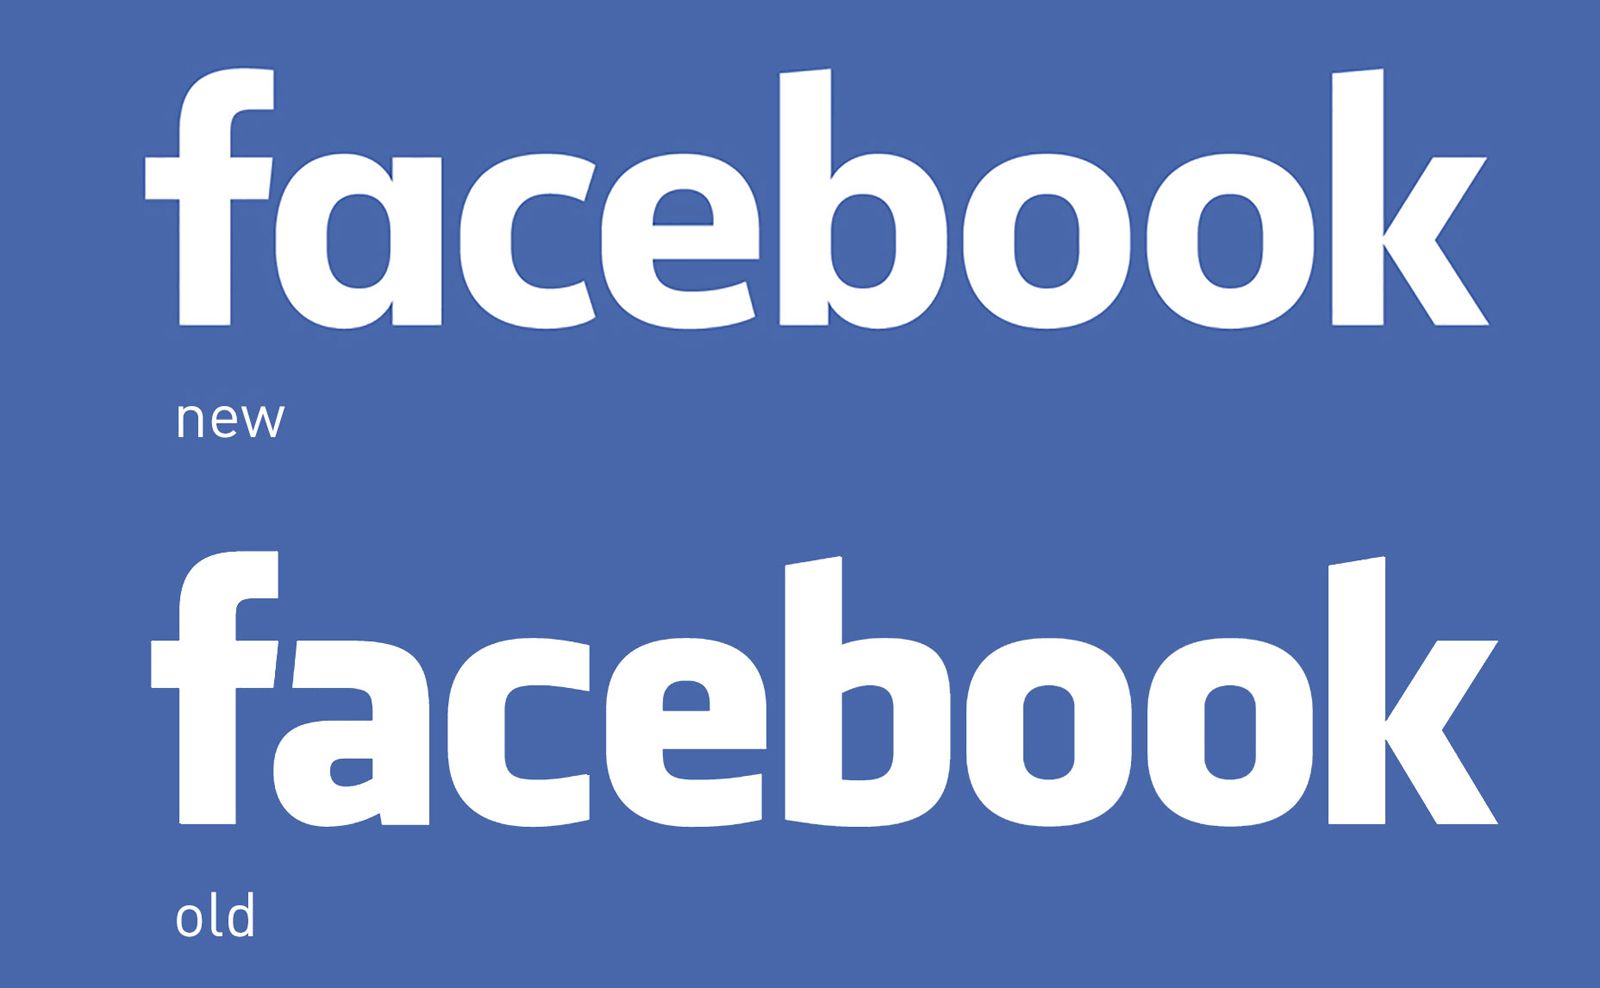 Rectangular Blue and White Logo - Facebook Logo, FB symbol meaning, History and Evolution